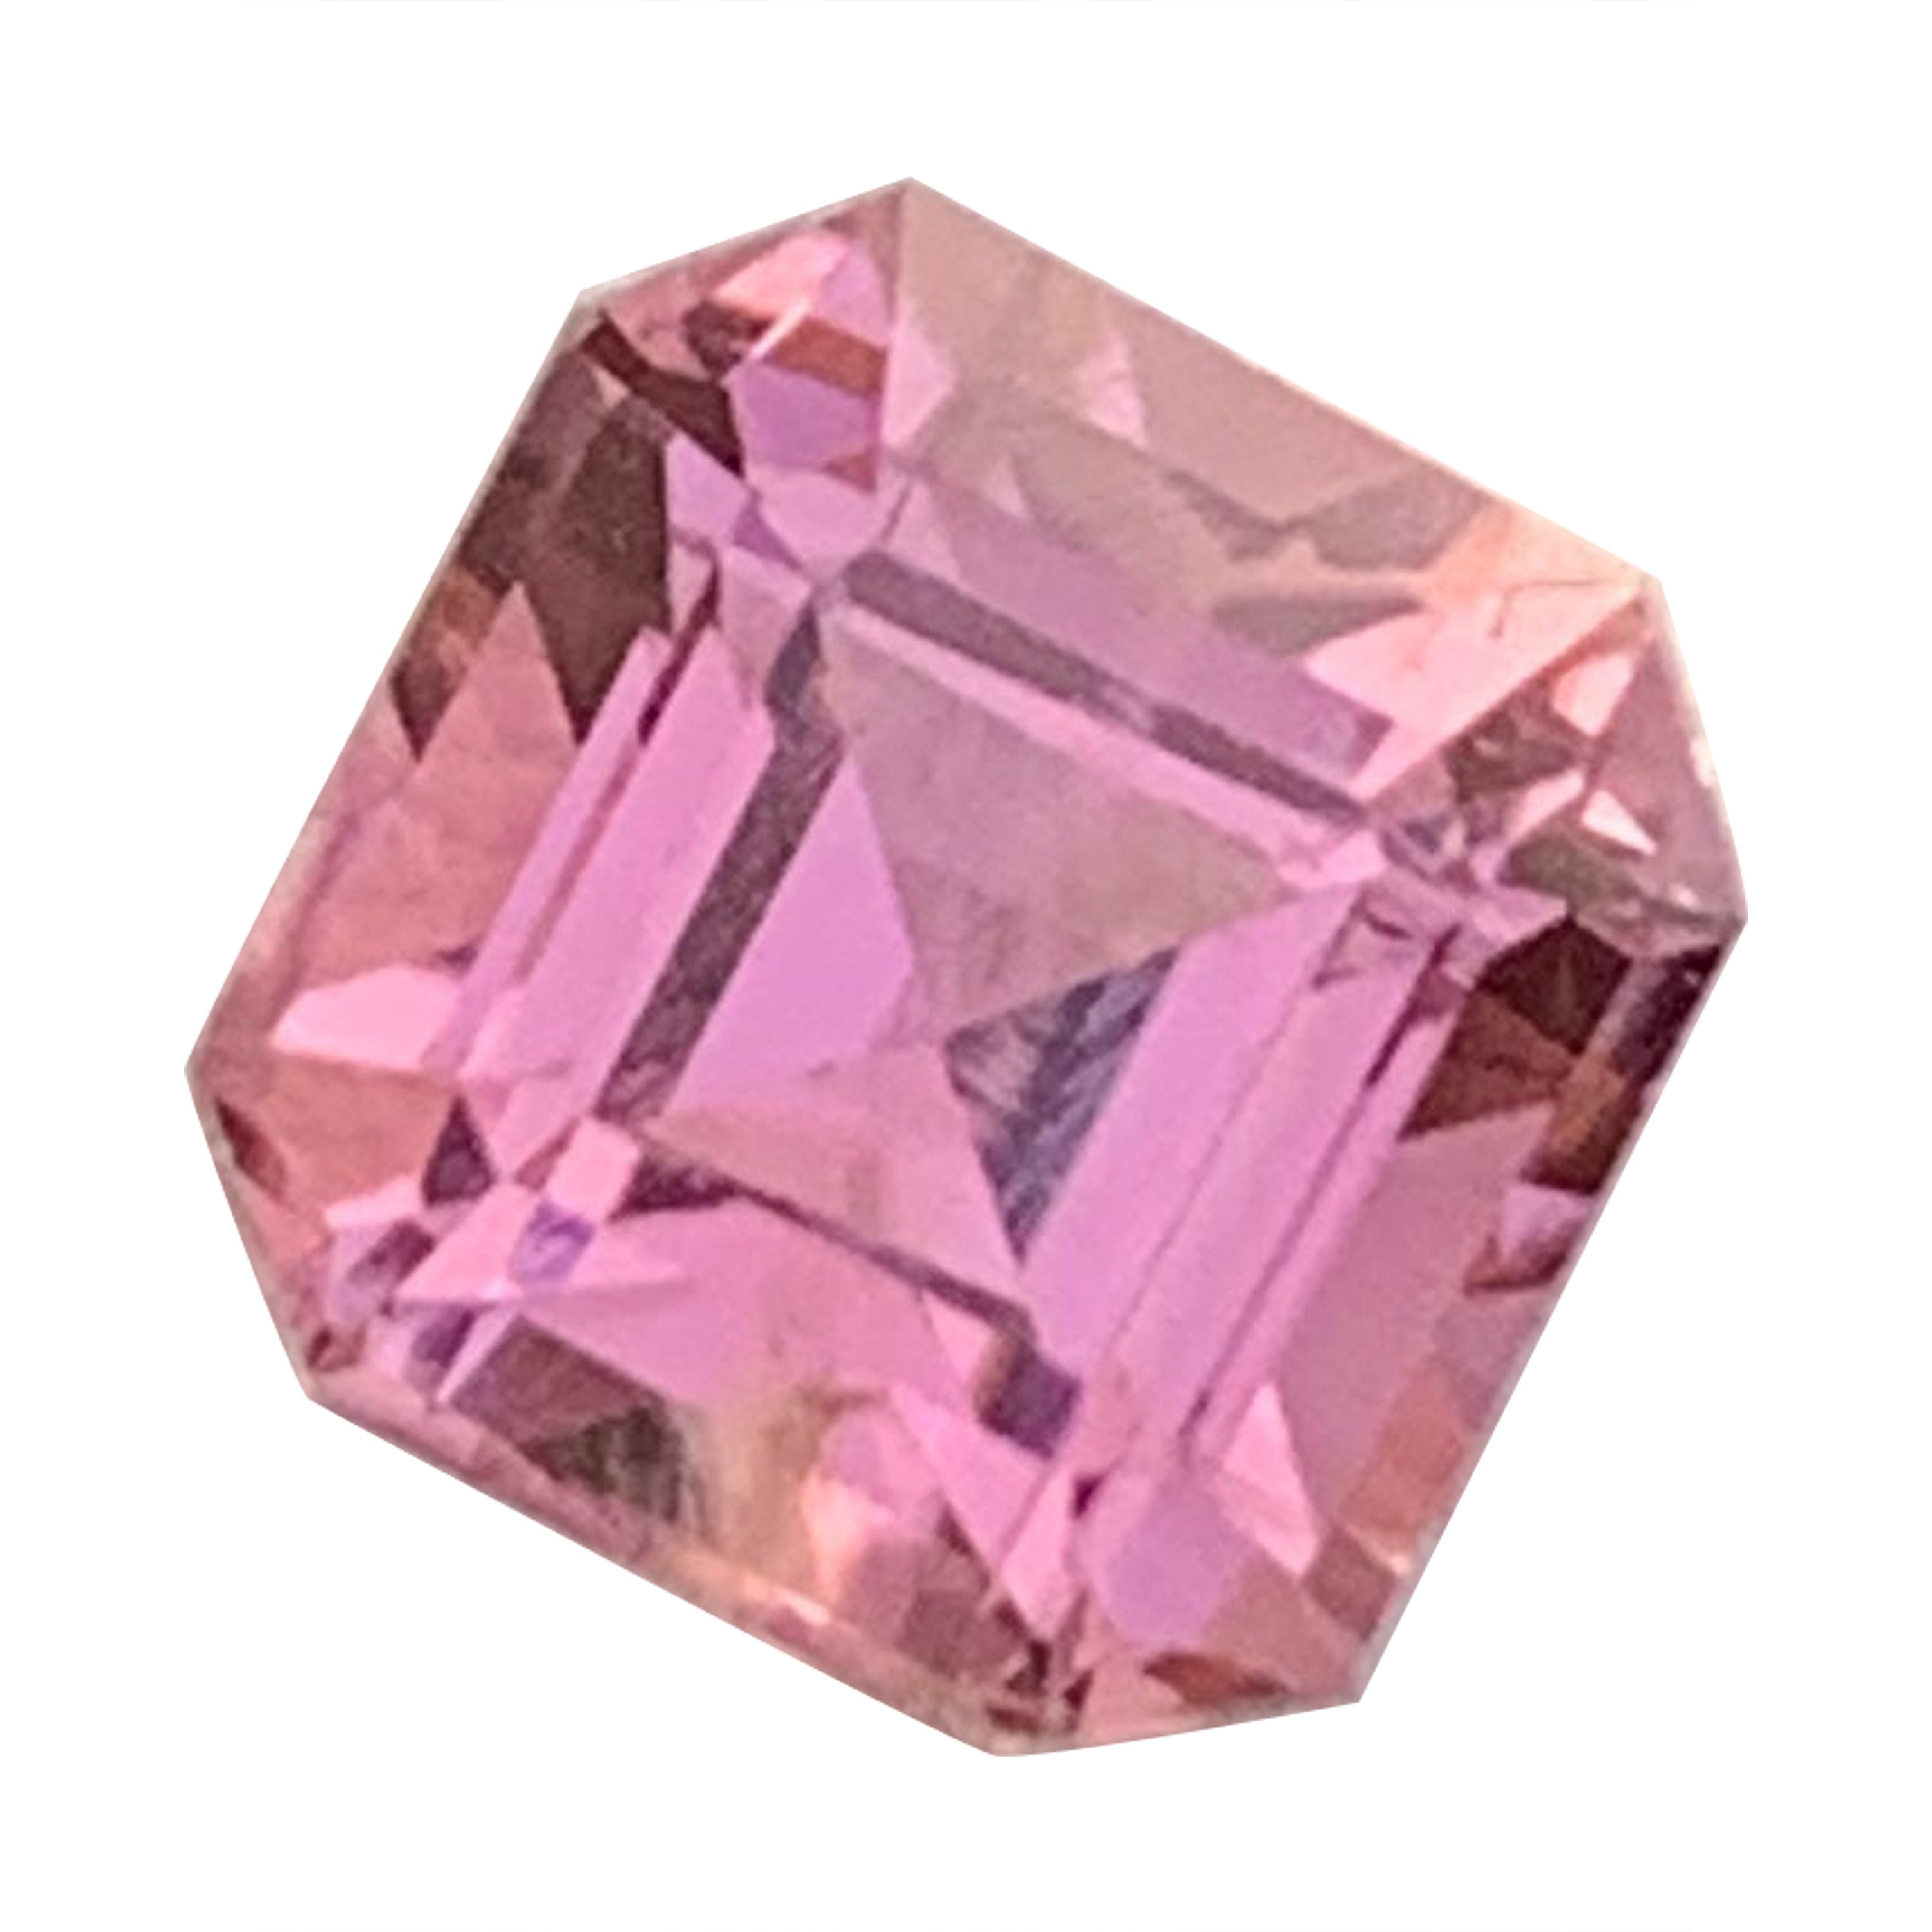 Pretty Soft Pink Tourmaline Gemstone 2.05 Carats Tourmaline Stone for Rings For Sale